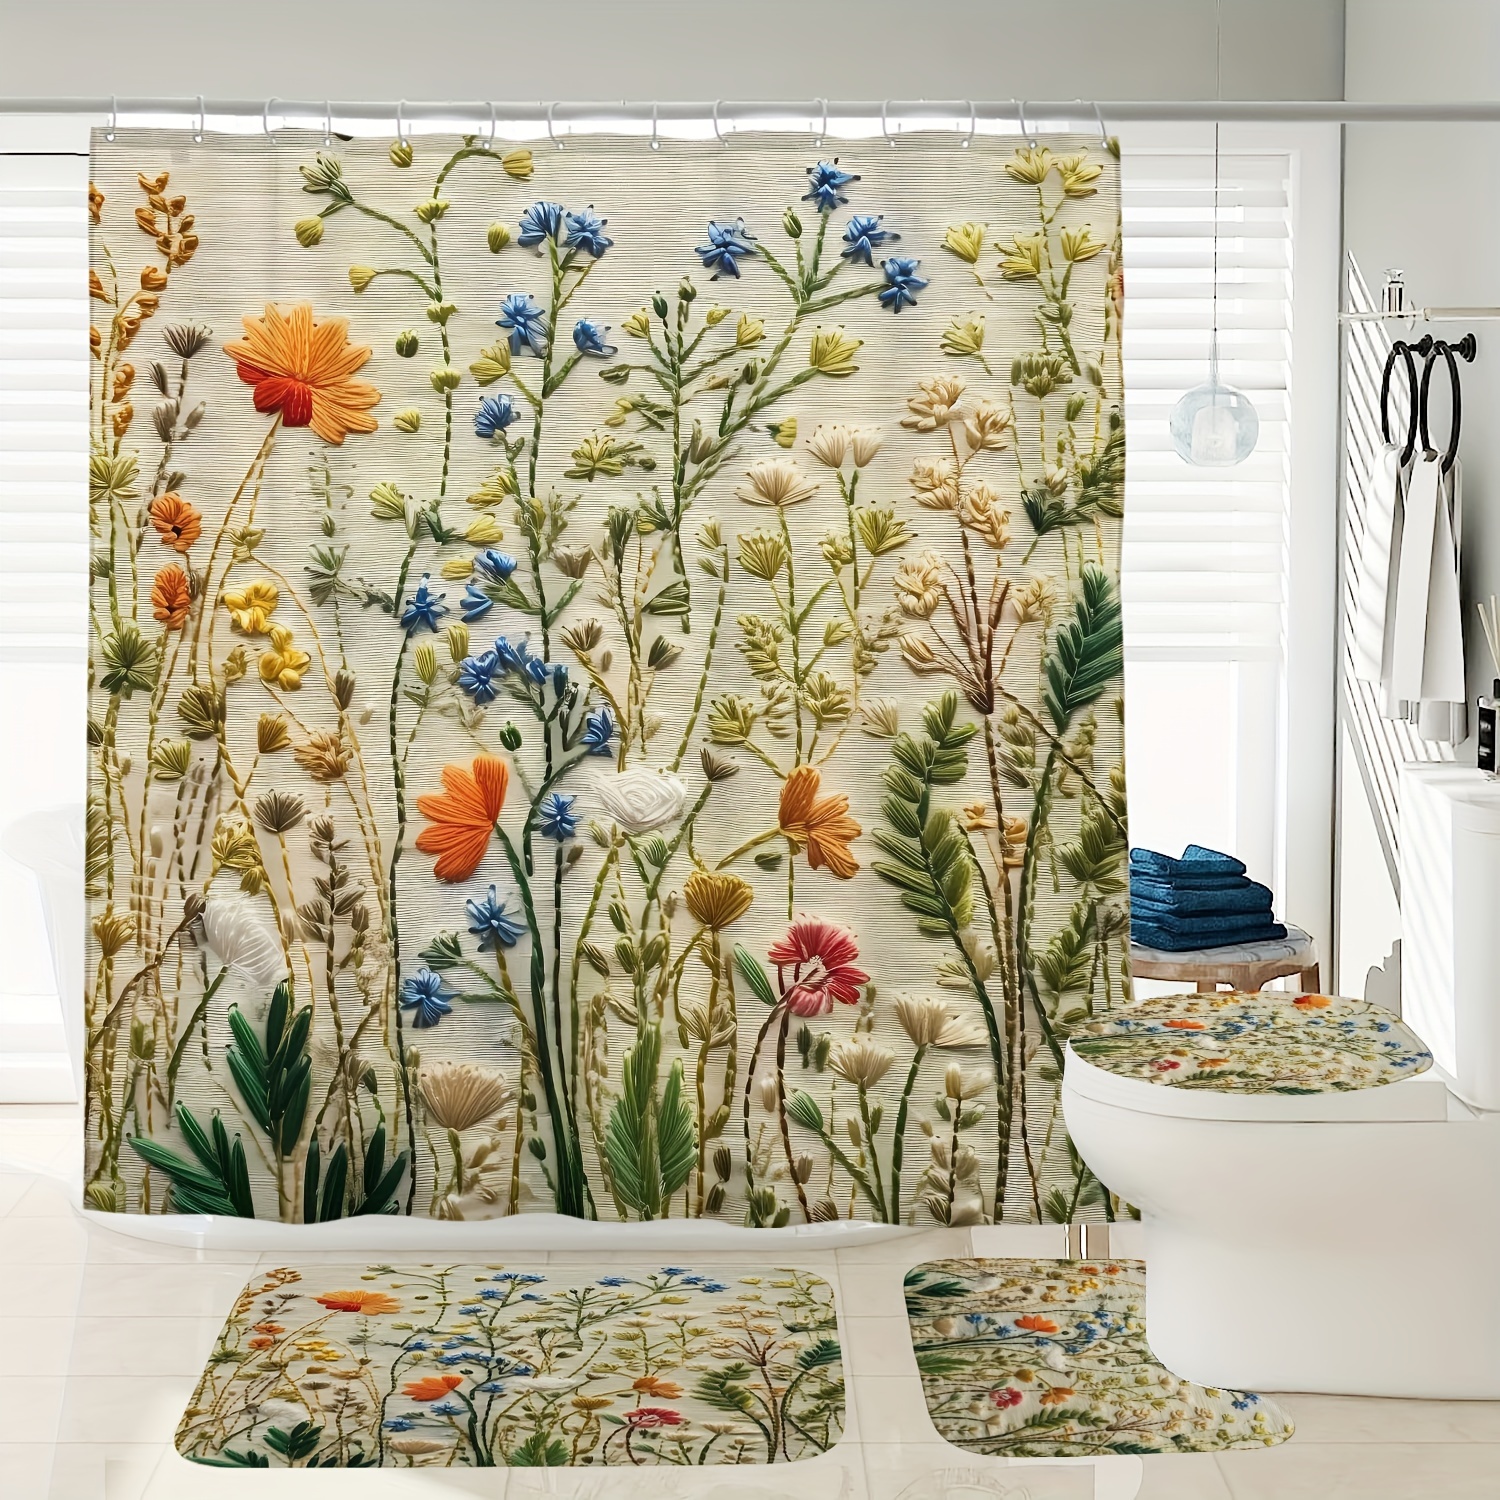 

1/3/4pcs Botanical Floral Pattern Bathroom Set, Waterproof Shower Curtain With 12 Hooks & 3 Anti-slip Mats, Toilet Cover, Absorbent Bath Rug, Bathroom Accessories, Home Decor